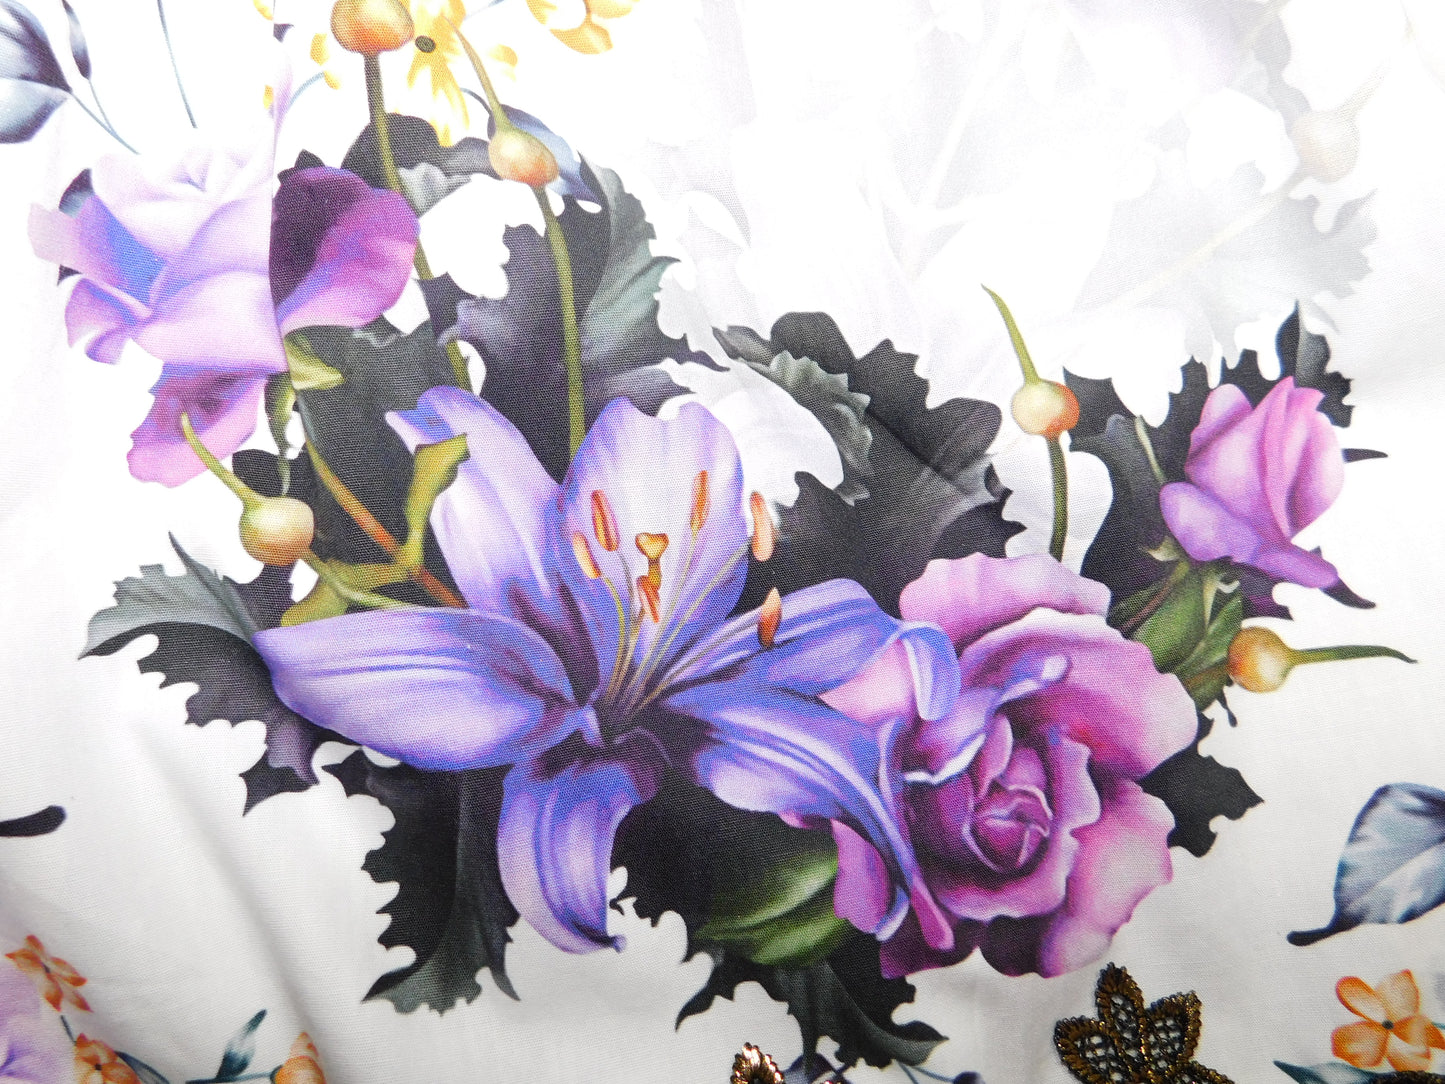 Dress - Exquisite Collection - Purple Lillium Flower, Purple Bias Binding on Sleeves and Black/Gold Lace Trim on Hemline